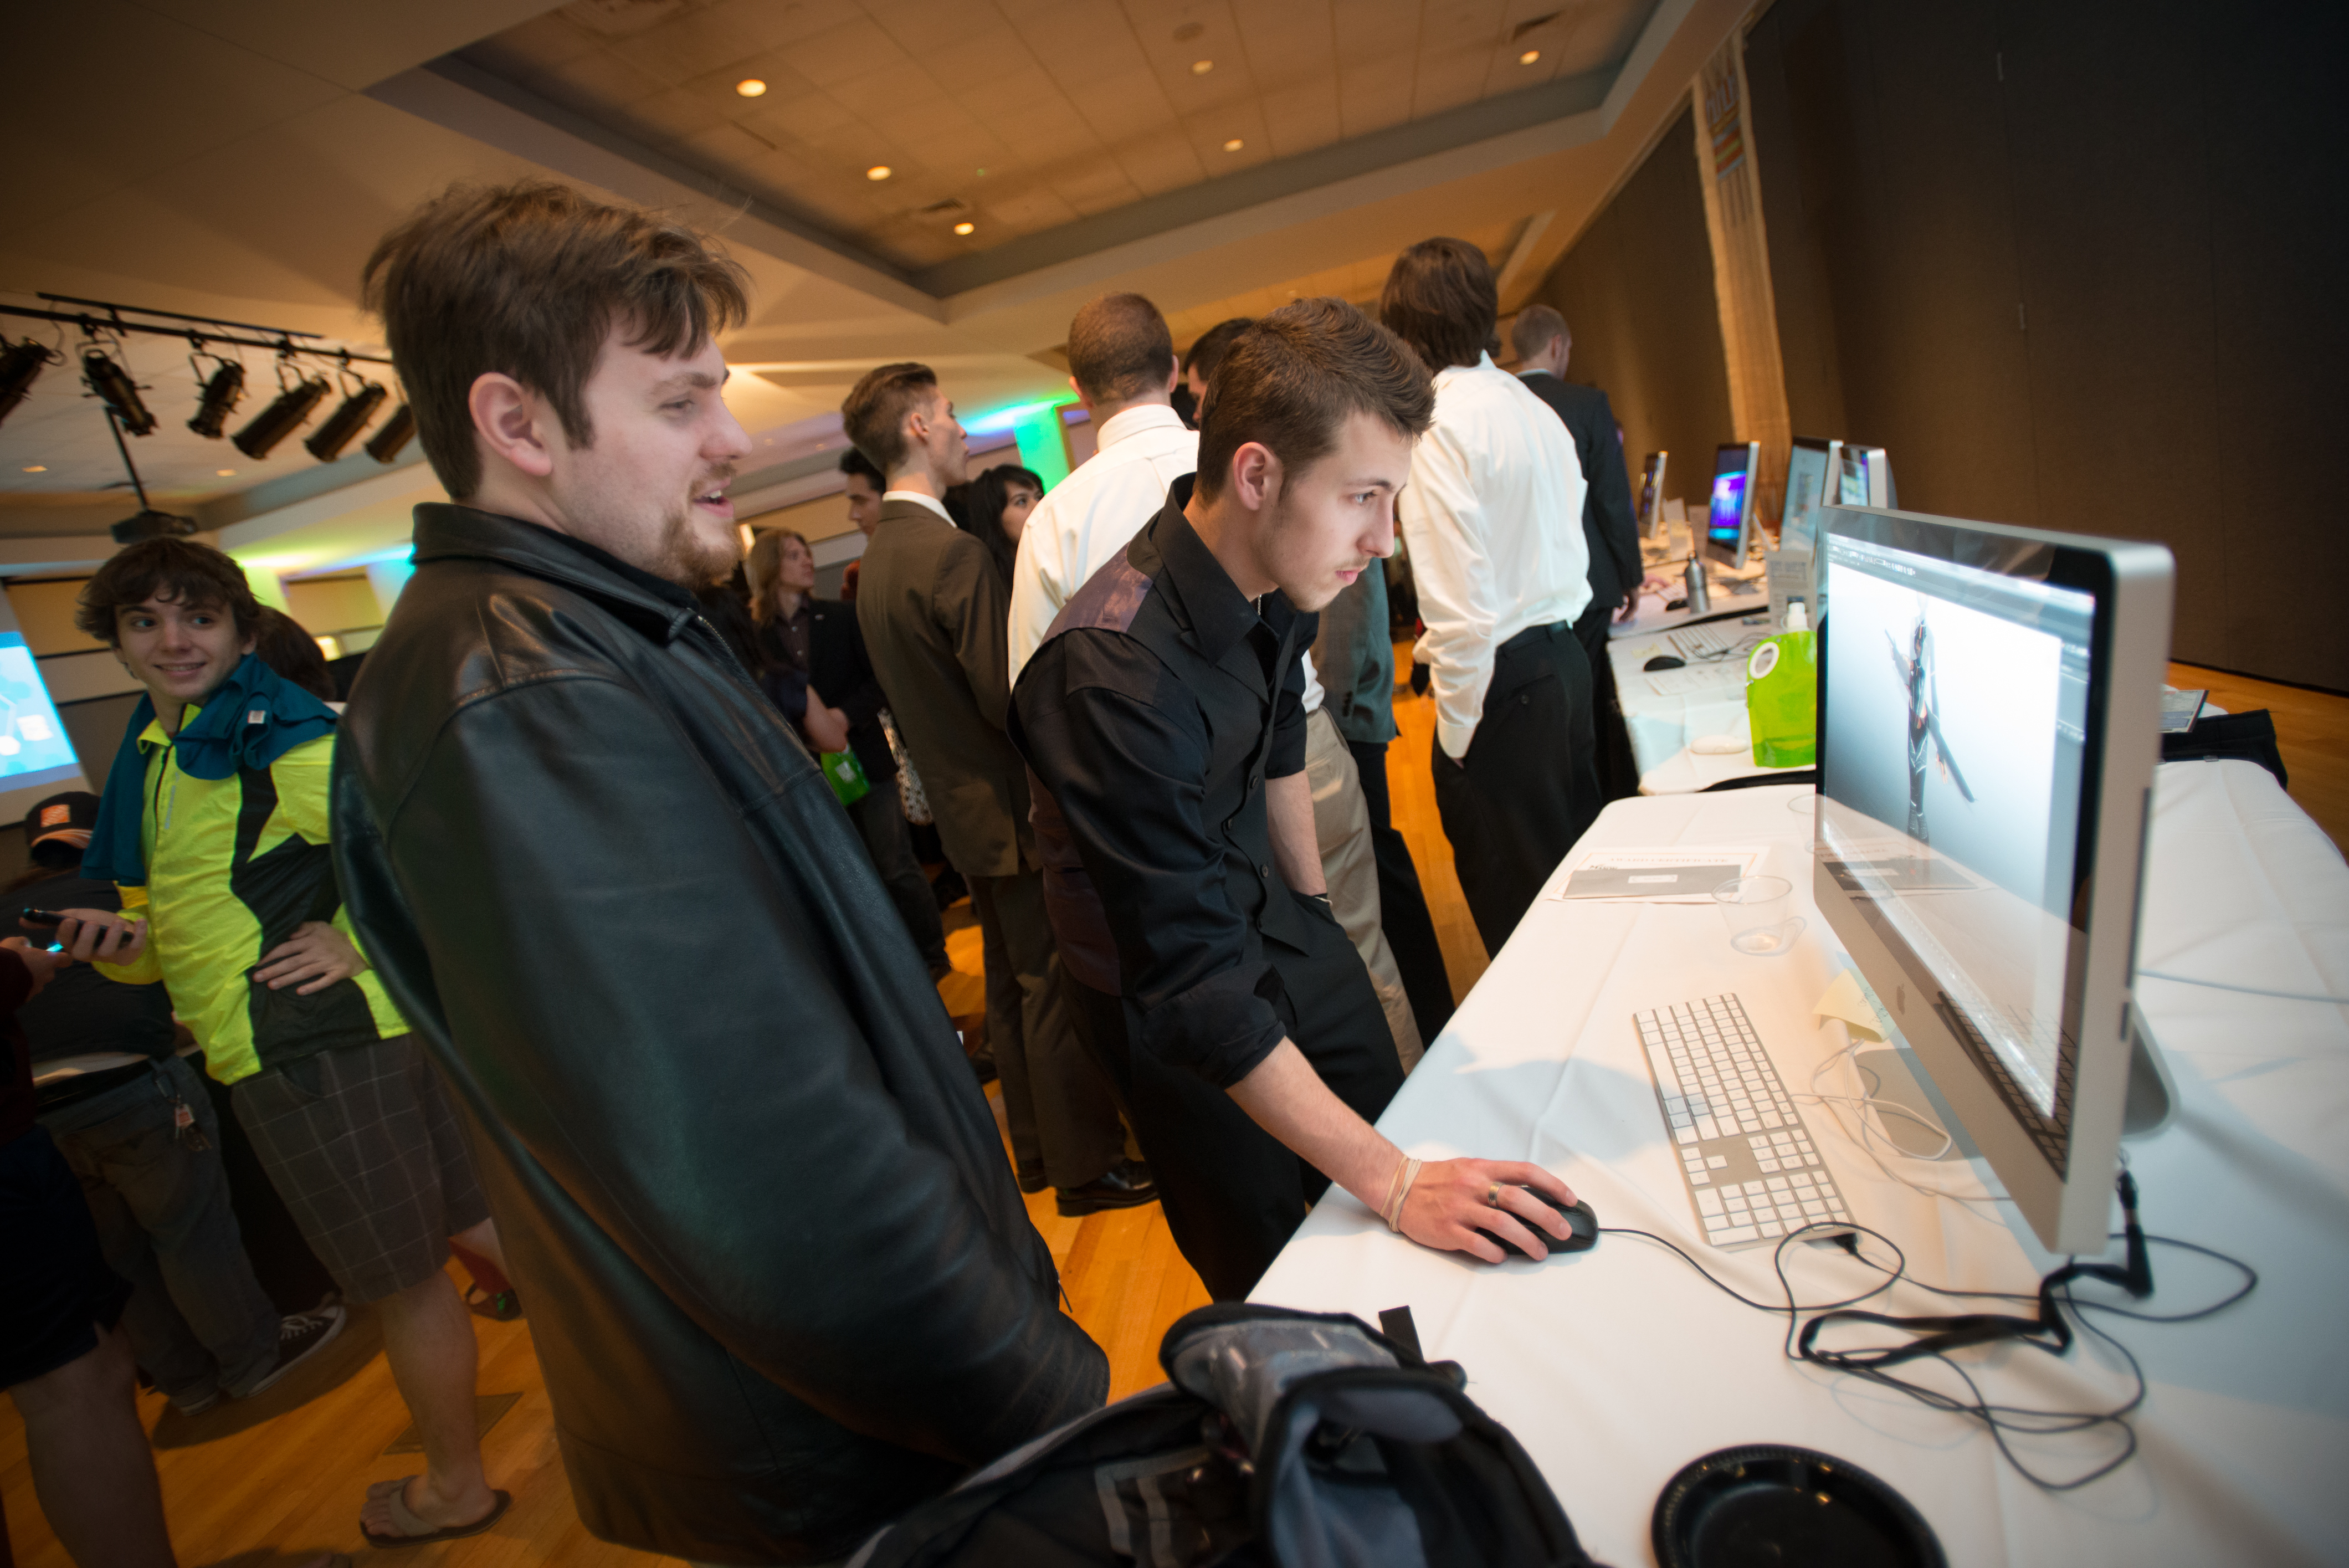 Game Design students presenting their work at the Senior Game Design Expo. Photo by Evan Cantwell/George Mason University